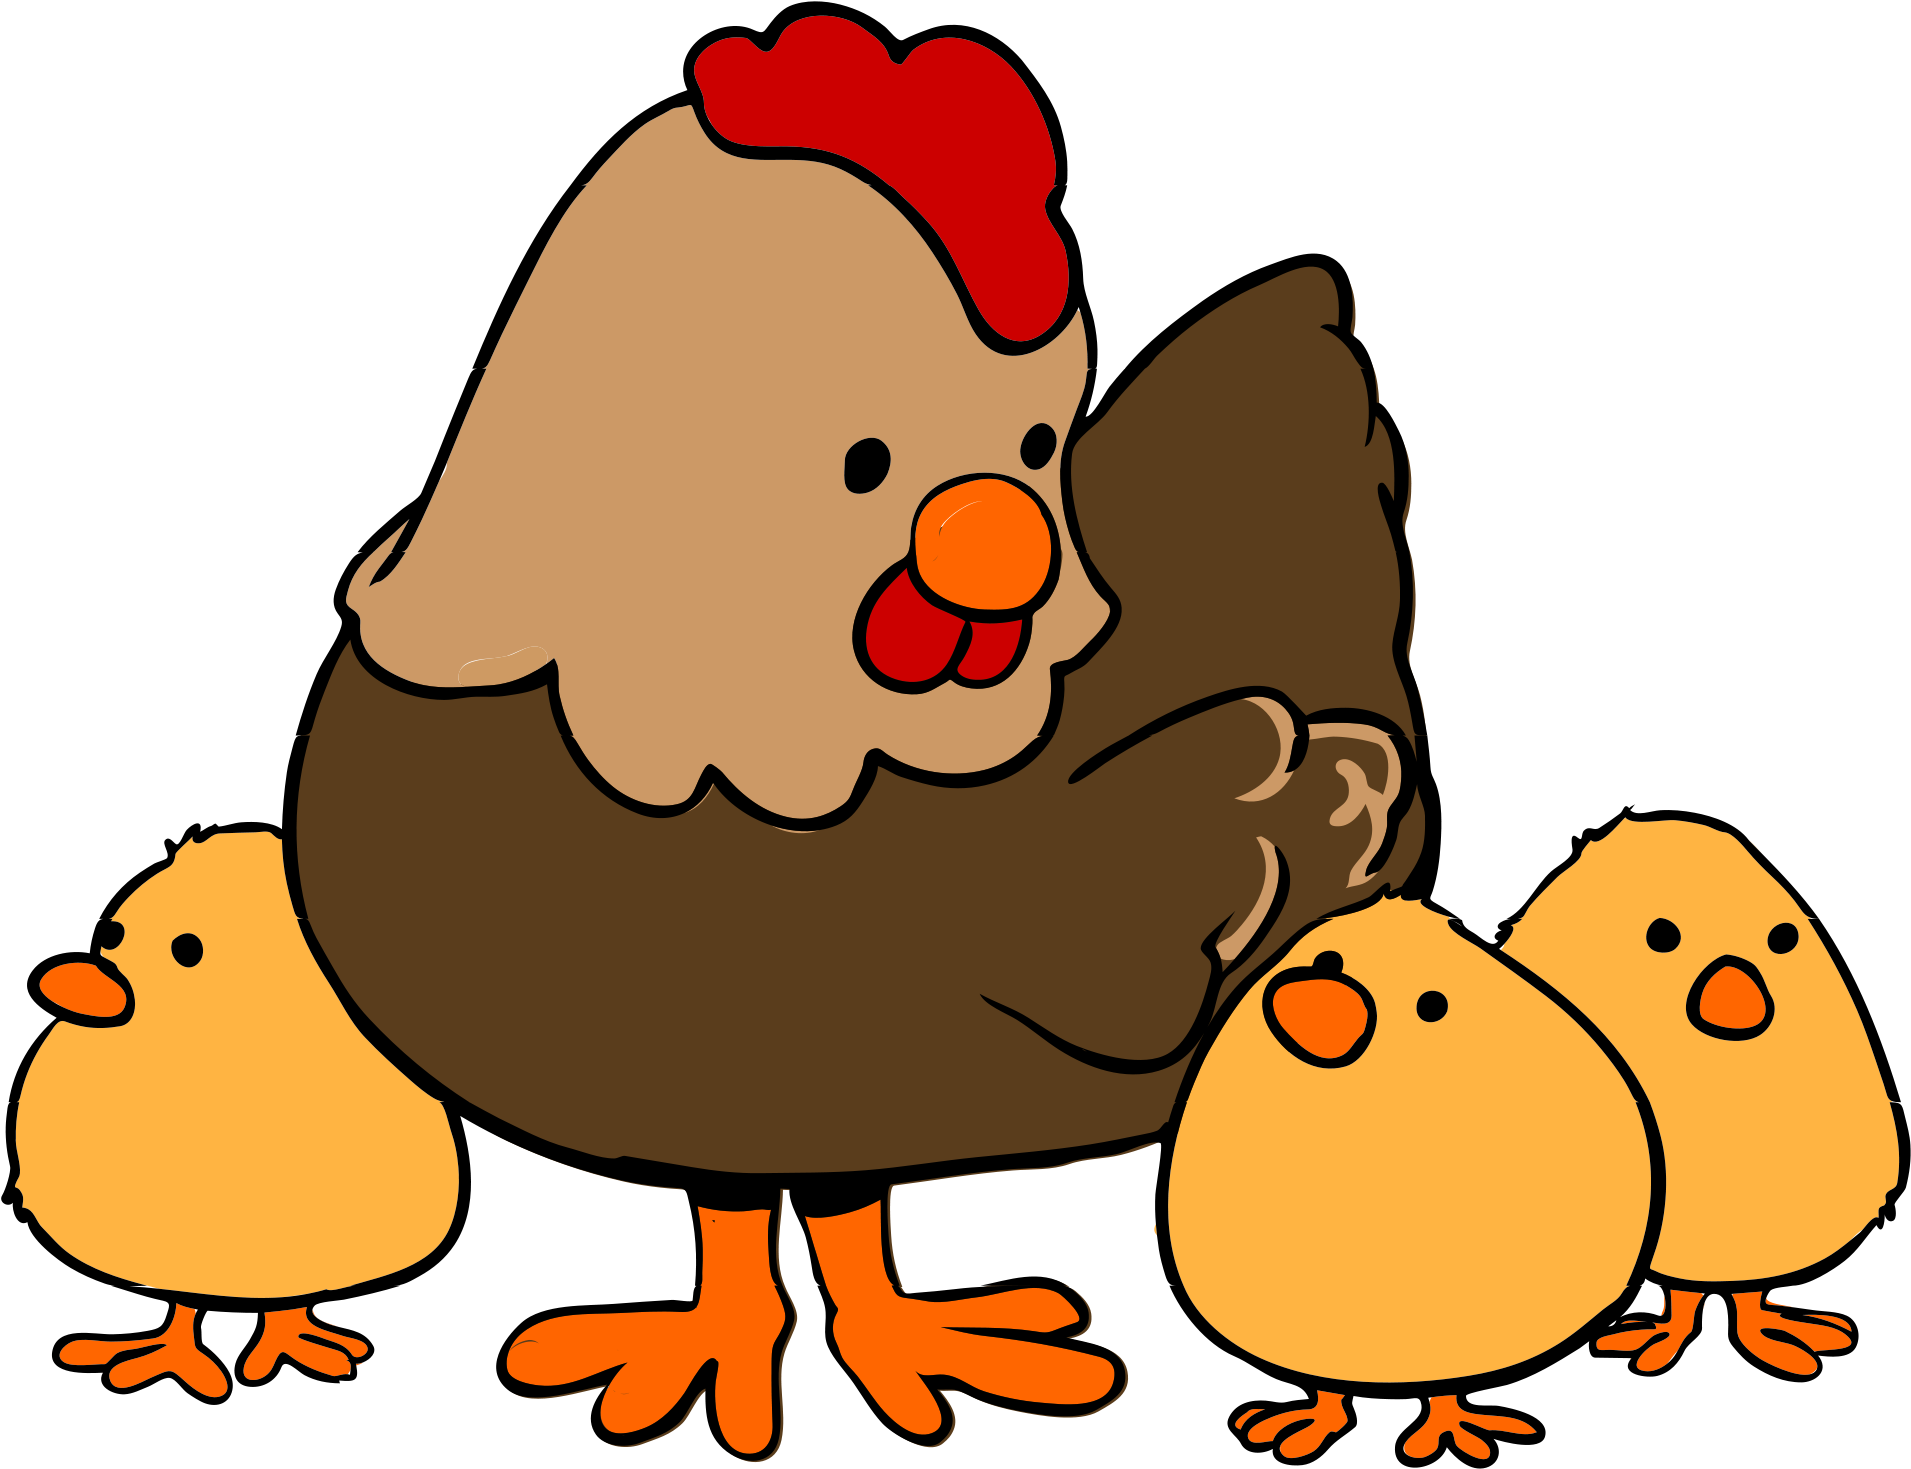 Mother Hen With Chicks Illustration